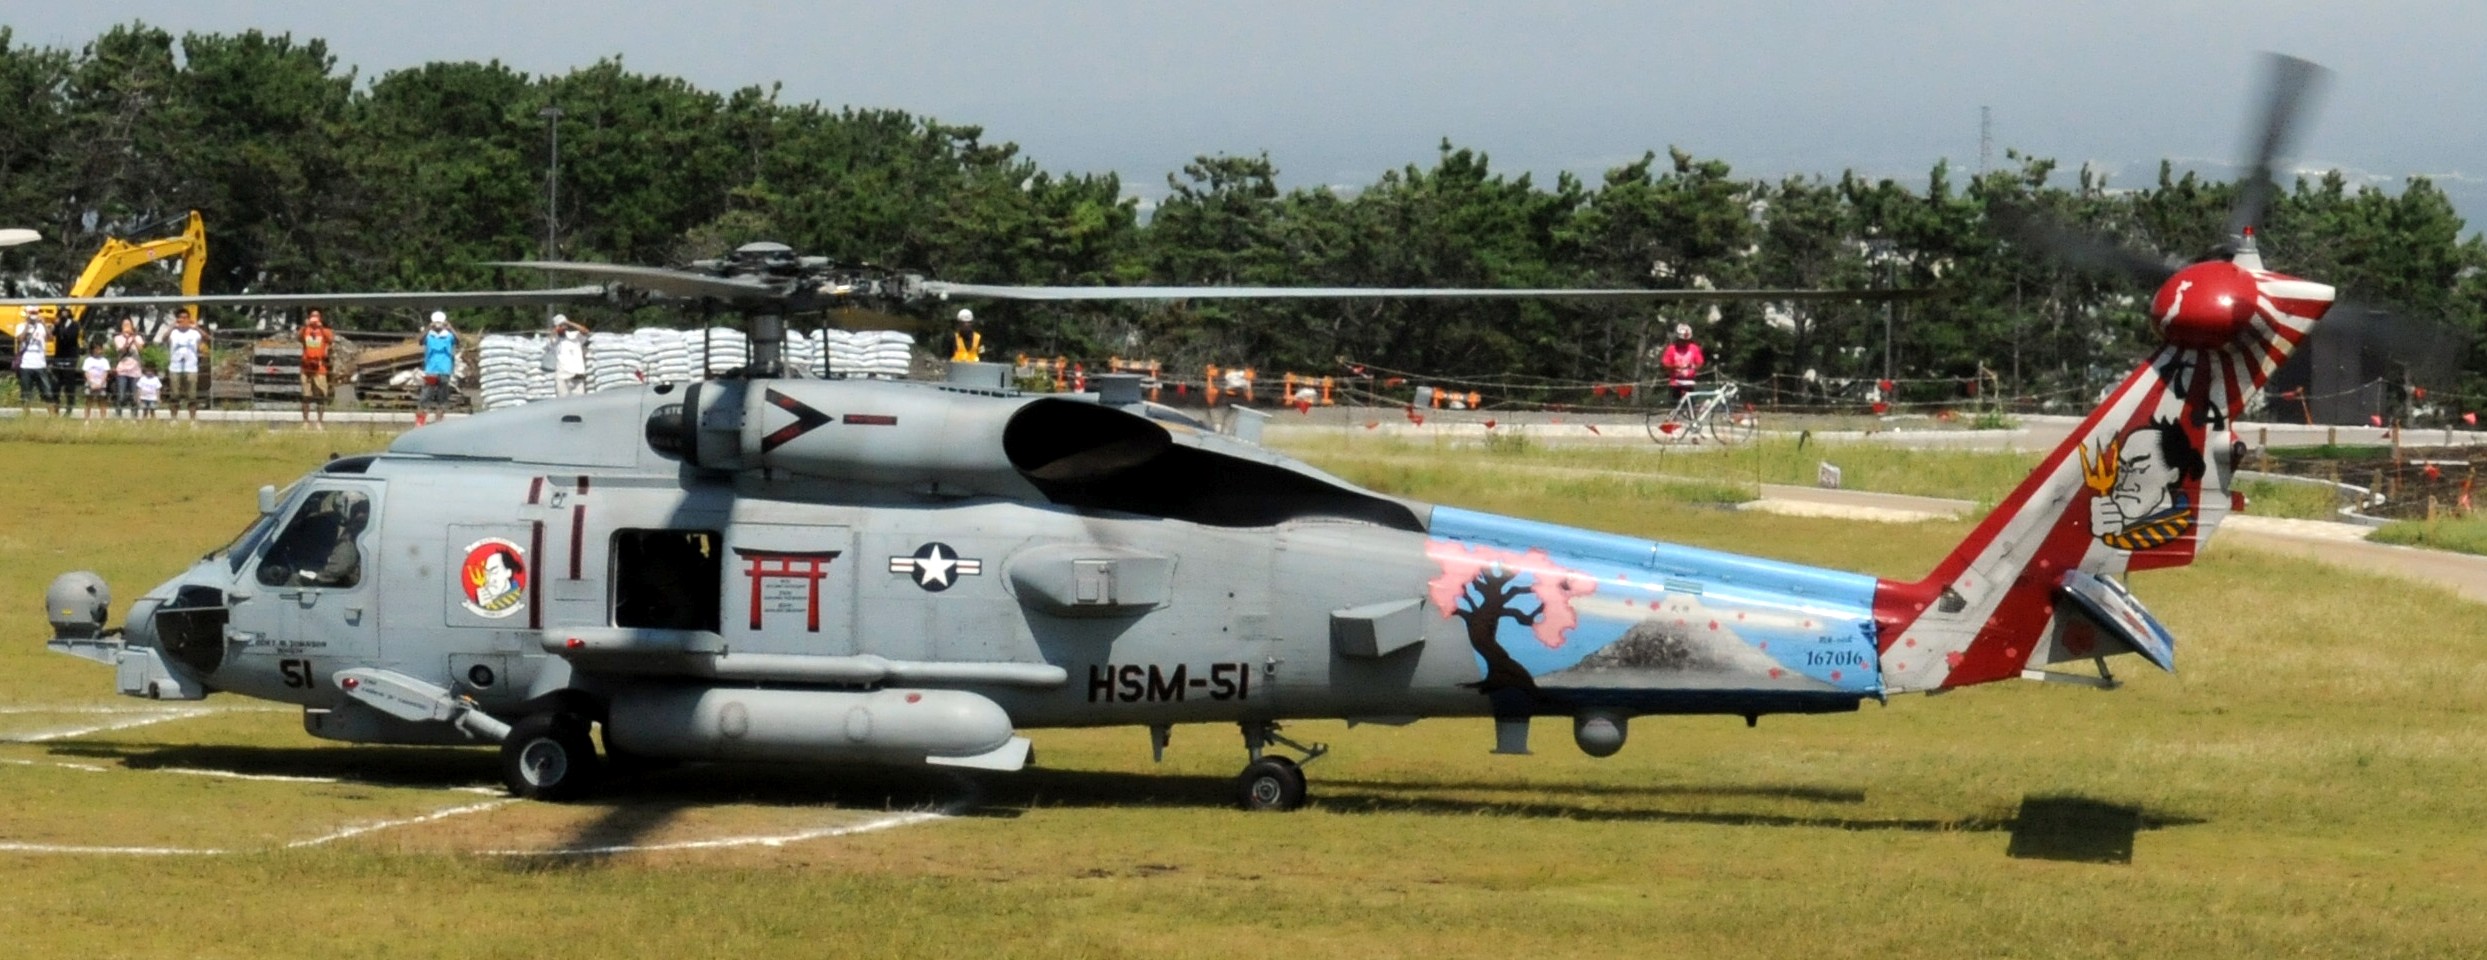 hsm-51 warlords helicopter maritime strike squadron mh-60r seahawk navy 2013 35 special painting fuyi aichi japan